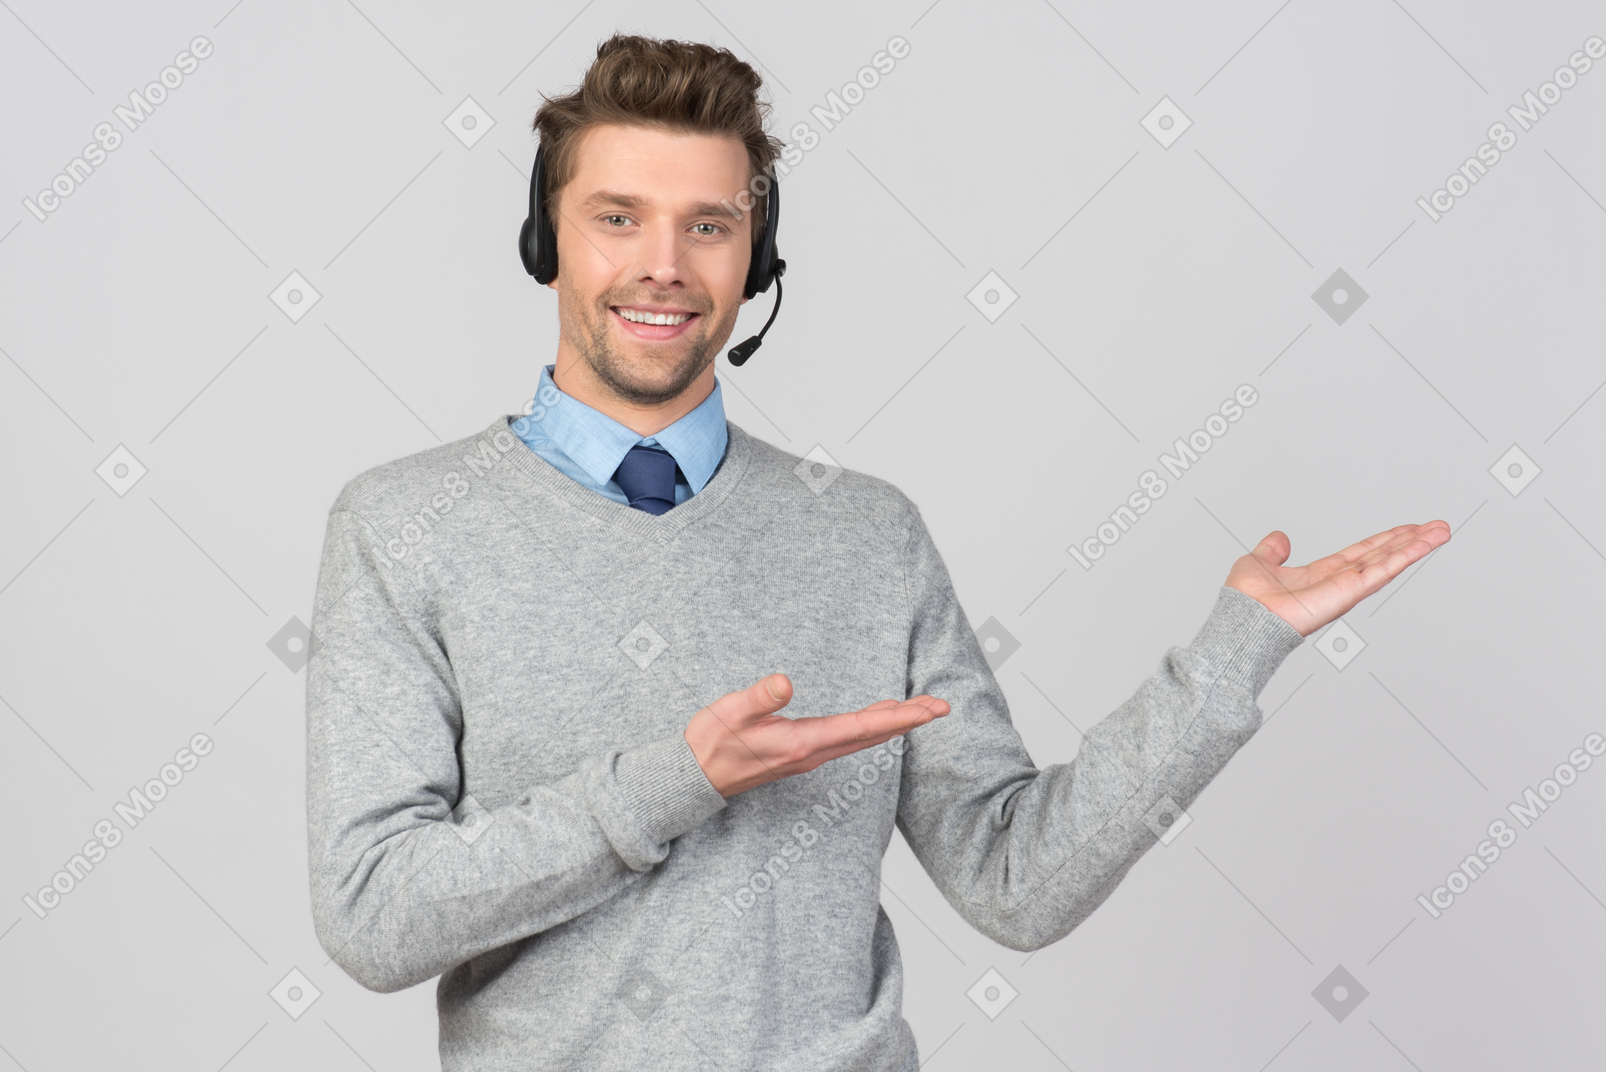 Call center agent showing a way to go with hands